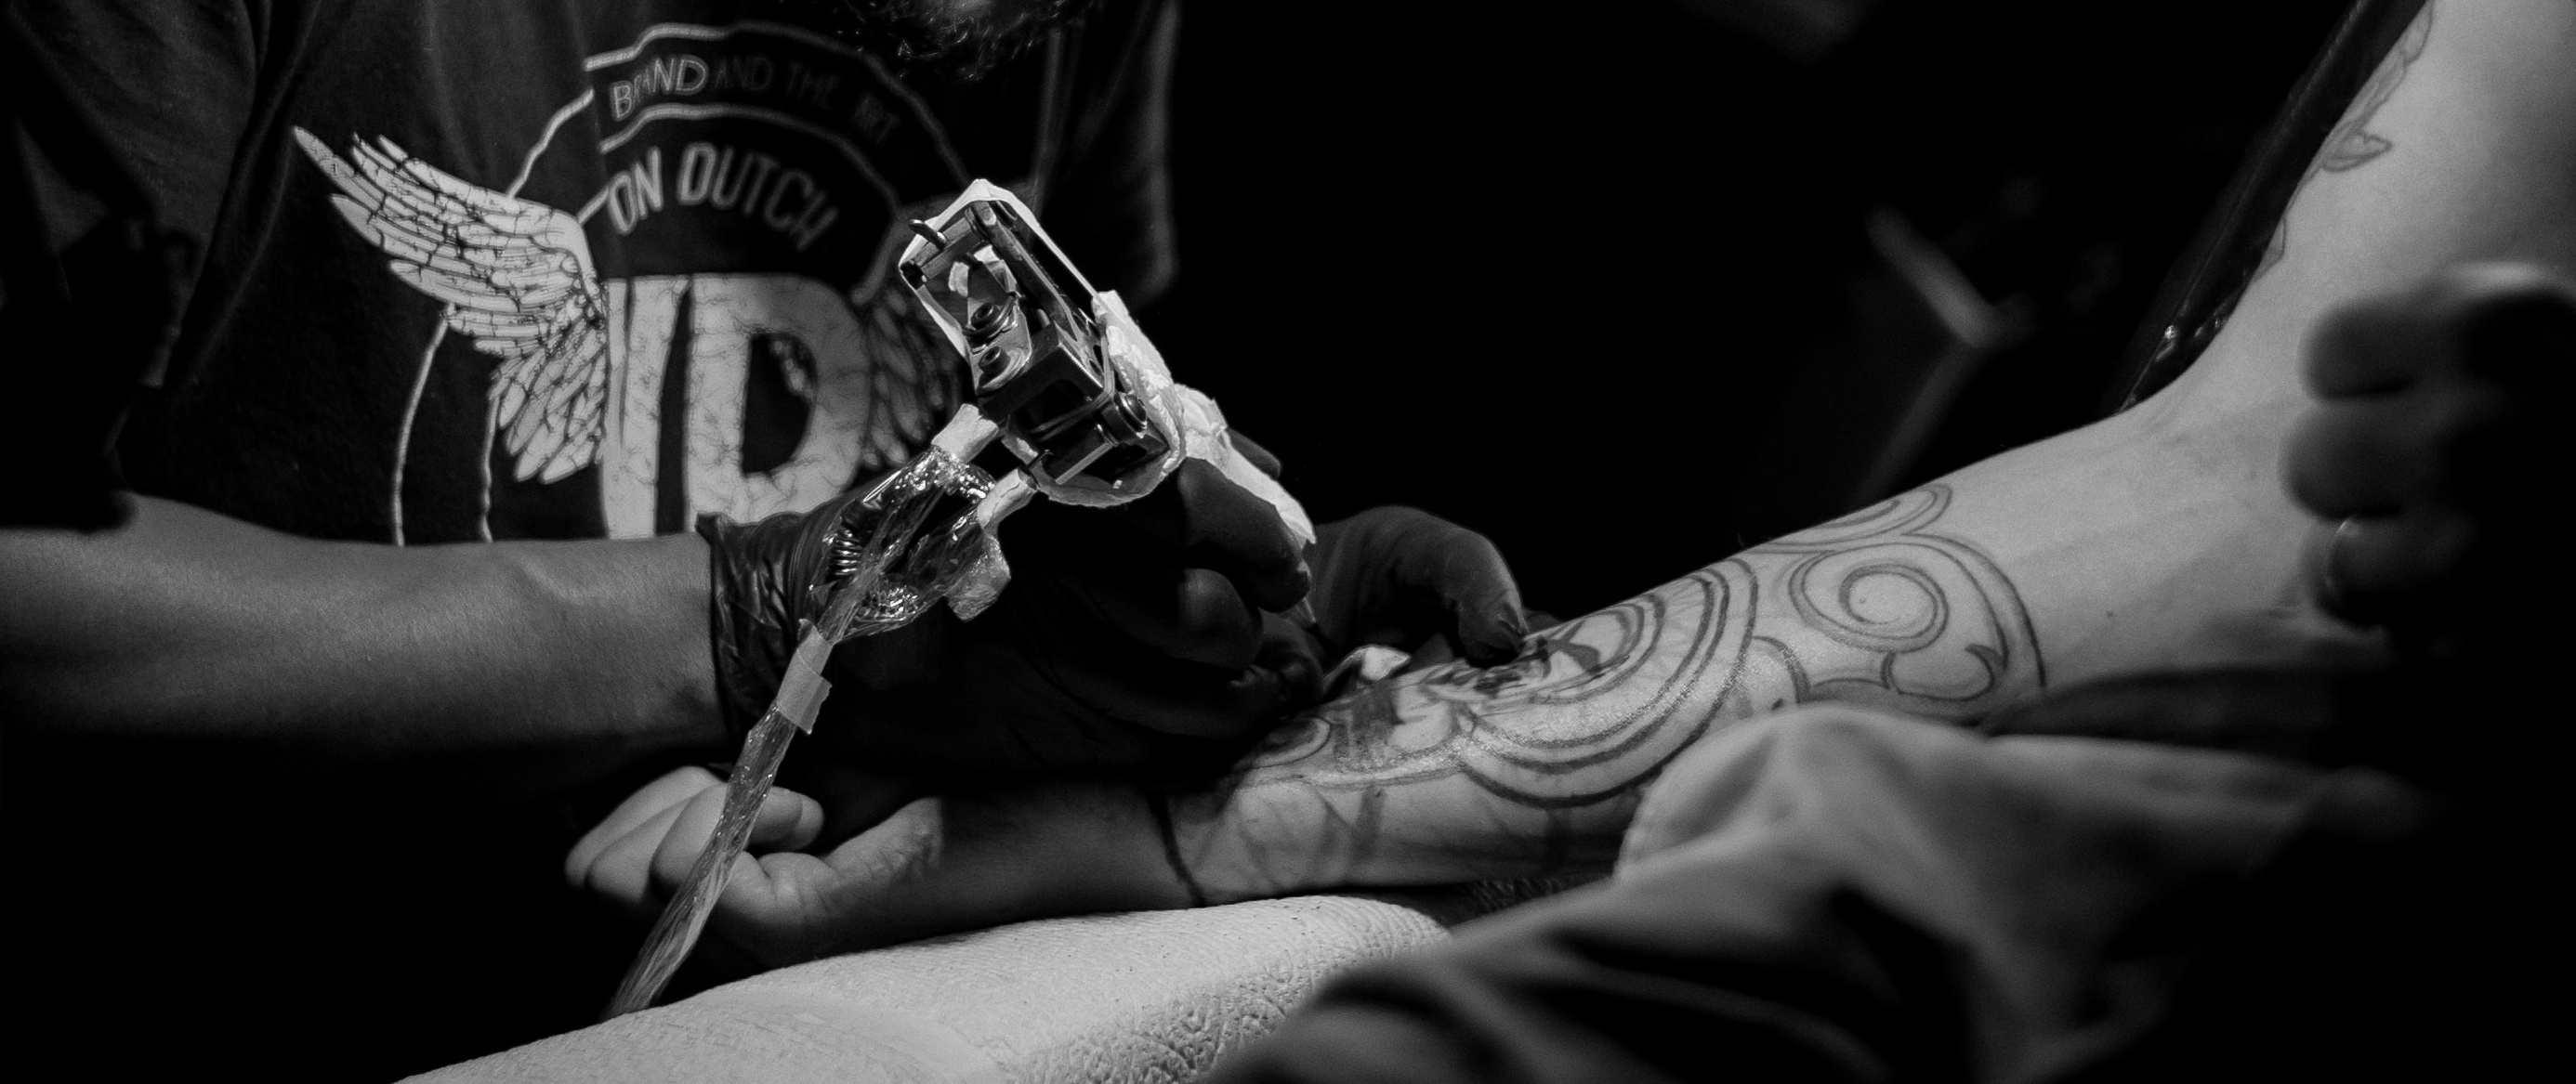 San Francisco Tattoo Shops With Special Friday the 13th Deals